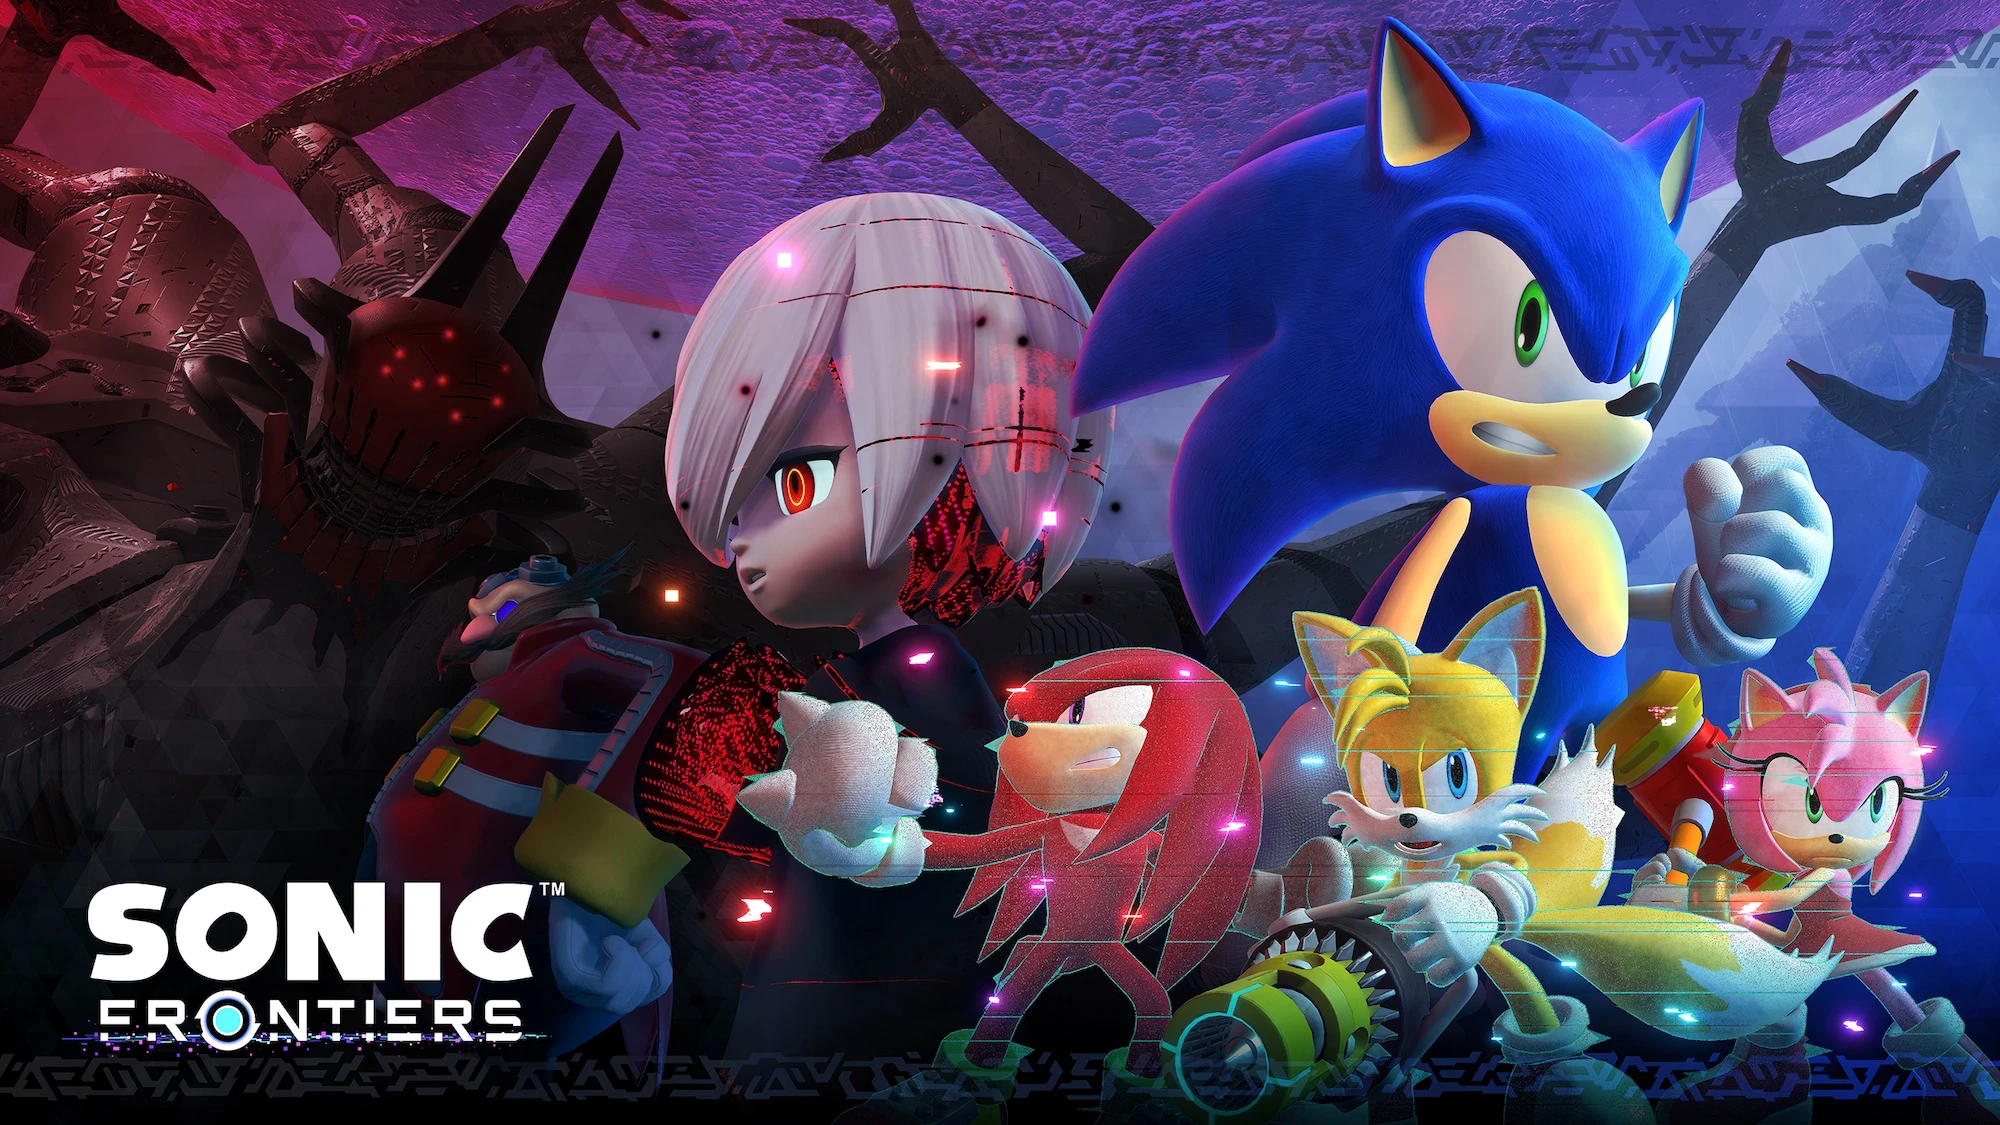 Sonic Central recap: New Sonic Frontiers animated special, Origins  gameplay, Prime preview, and more - Tails' Channel